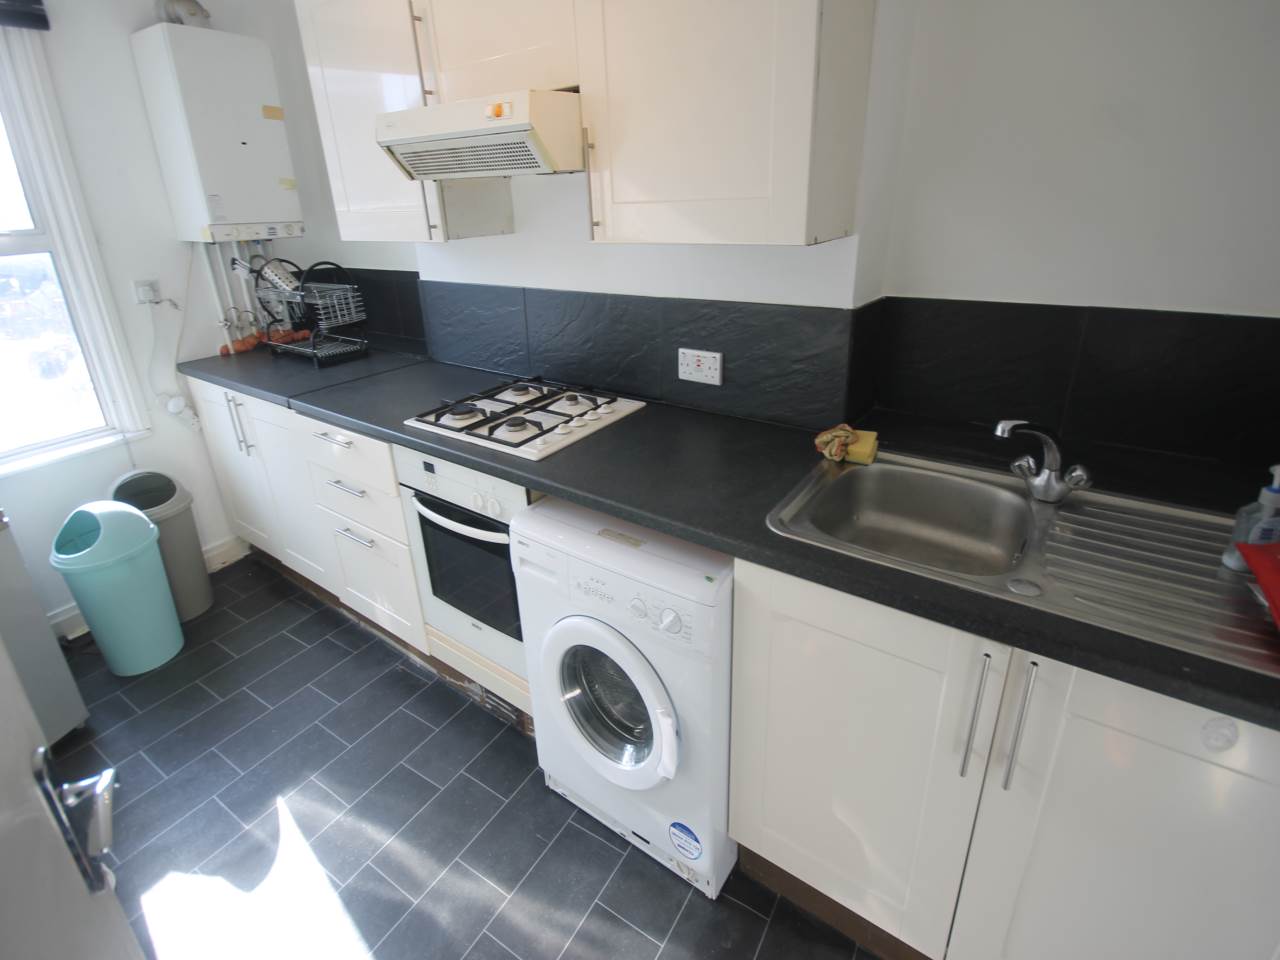 1 bed flat to rent in Osborne Mews, Walthamstow, E17 